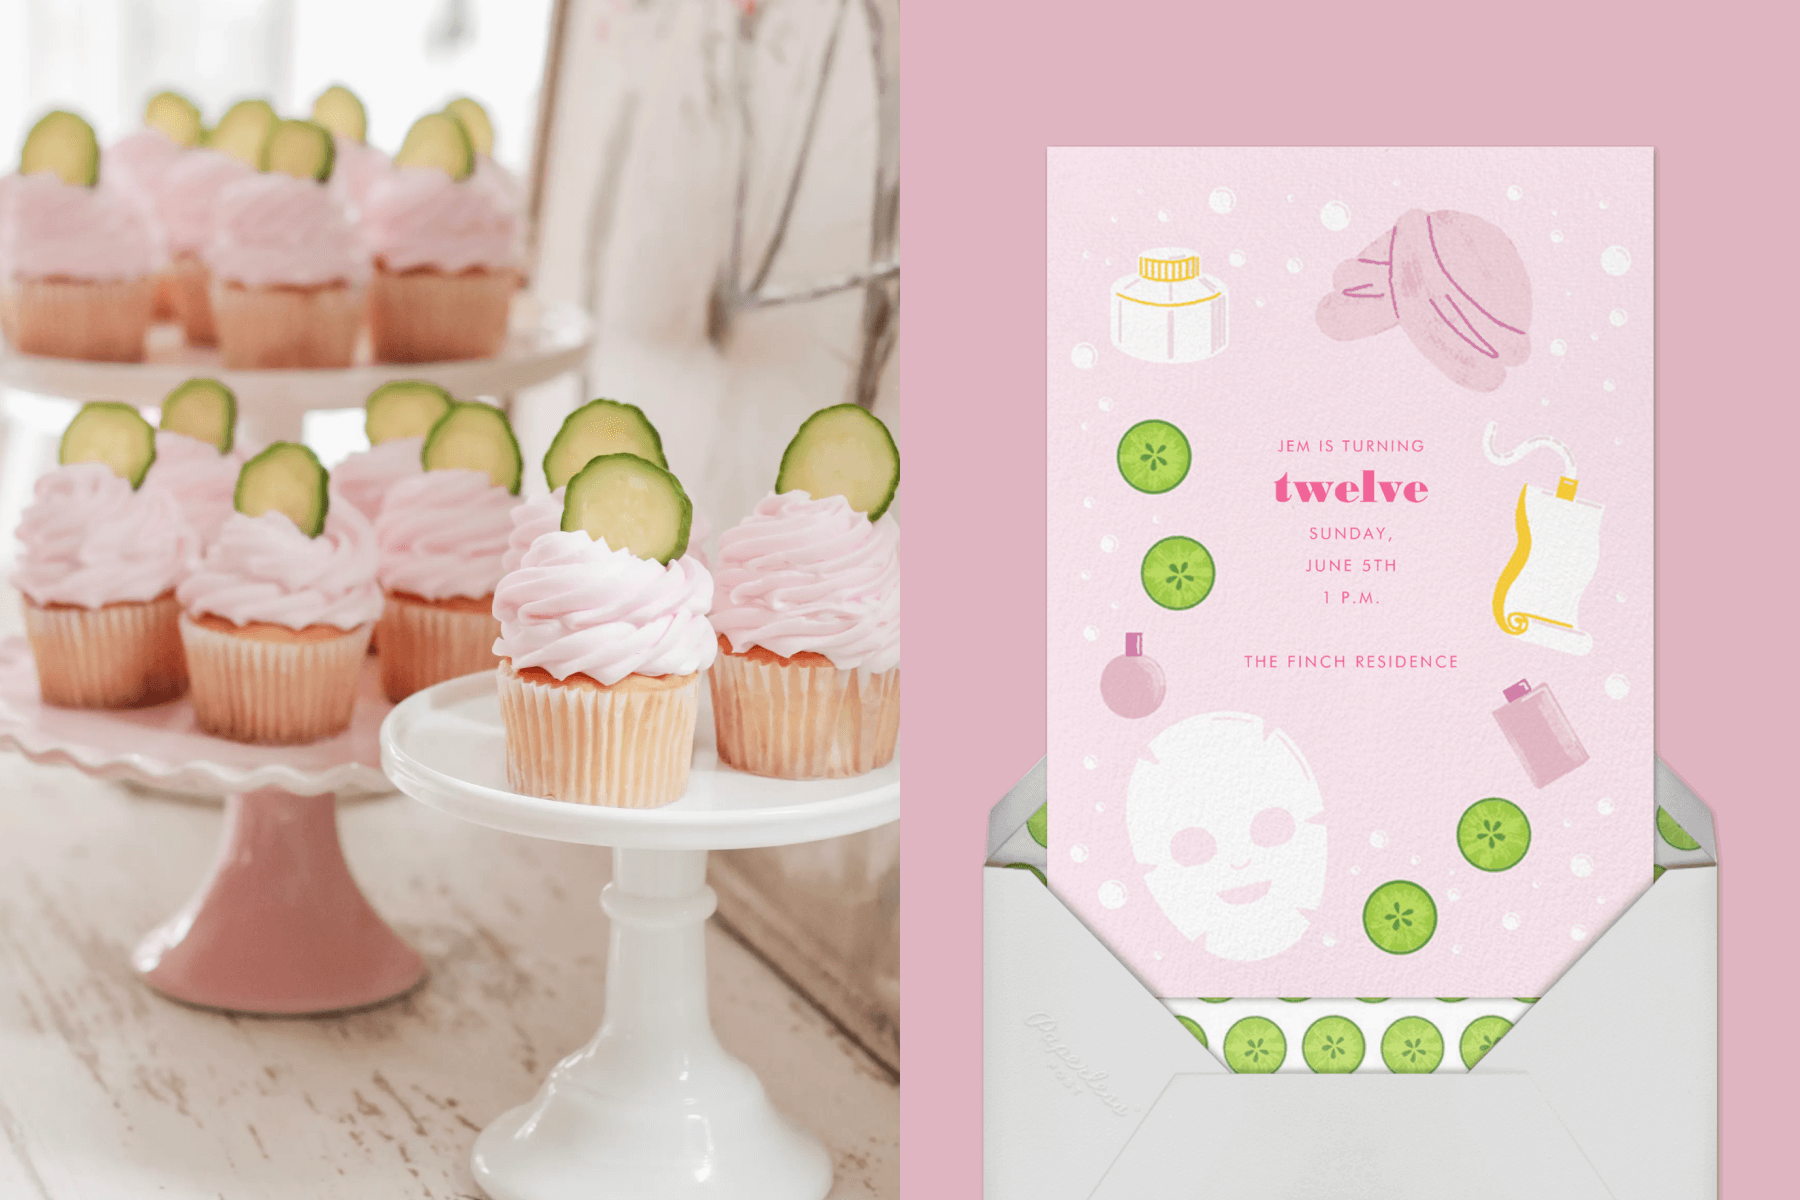 left: Cupcakes with pink frosting and cucumber slice garnishes. Right: Pink birthday invitation with spa items like sheet masks, cucumber slices, and a hair wrap.